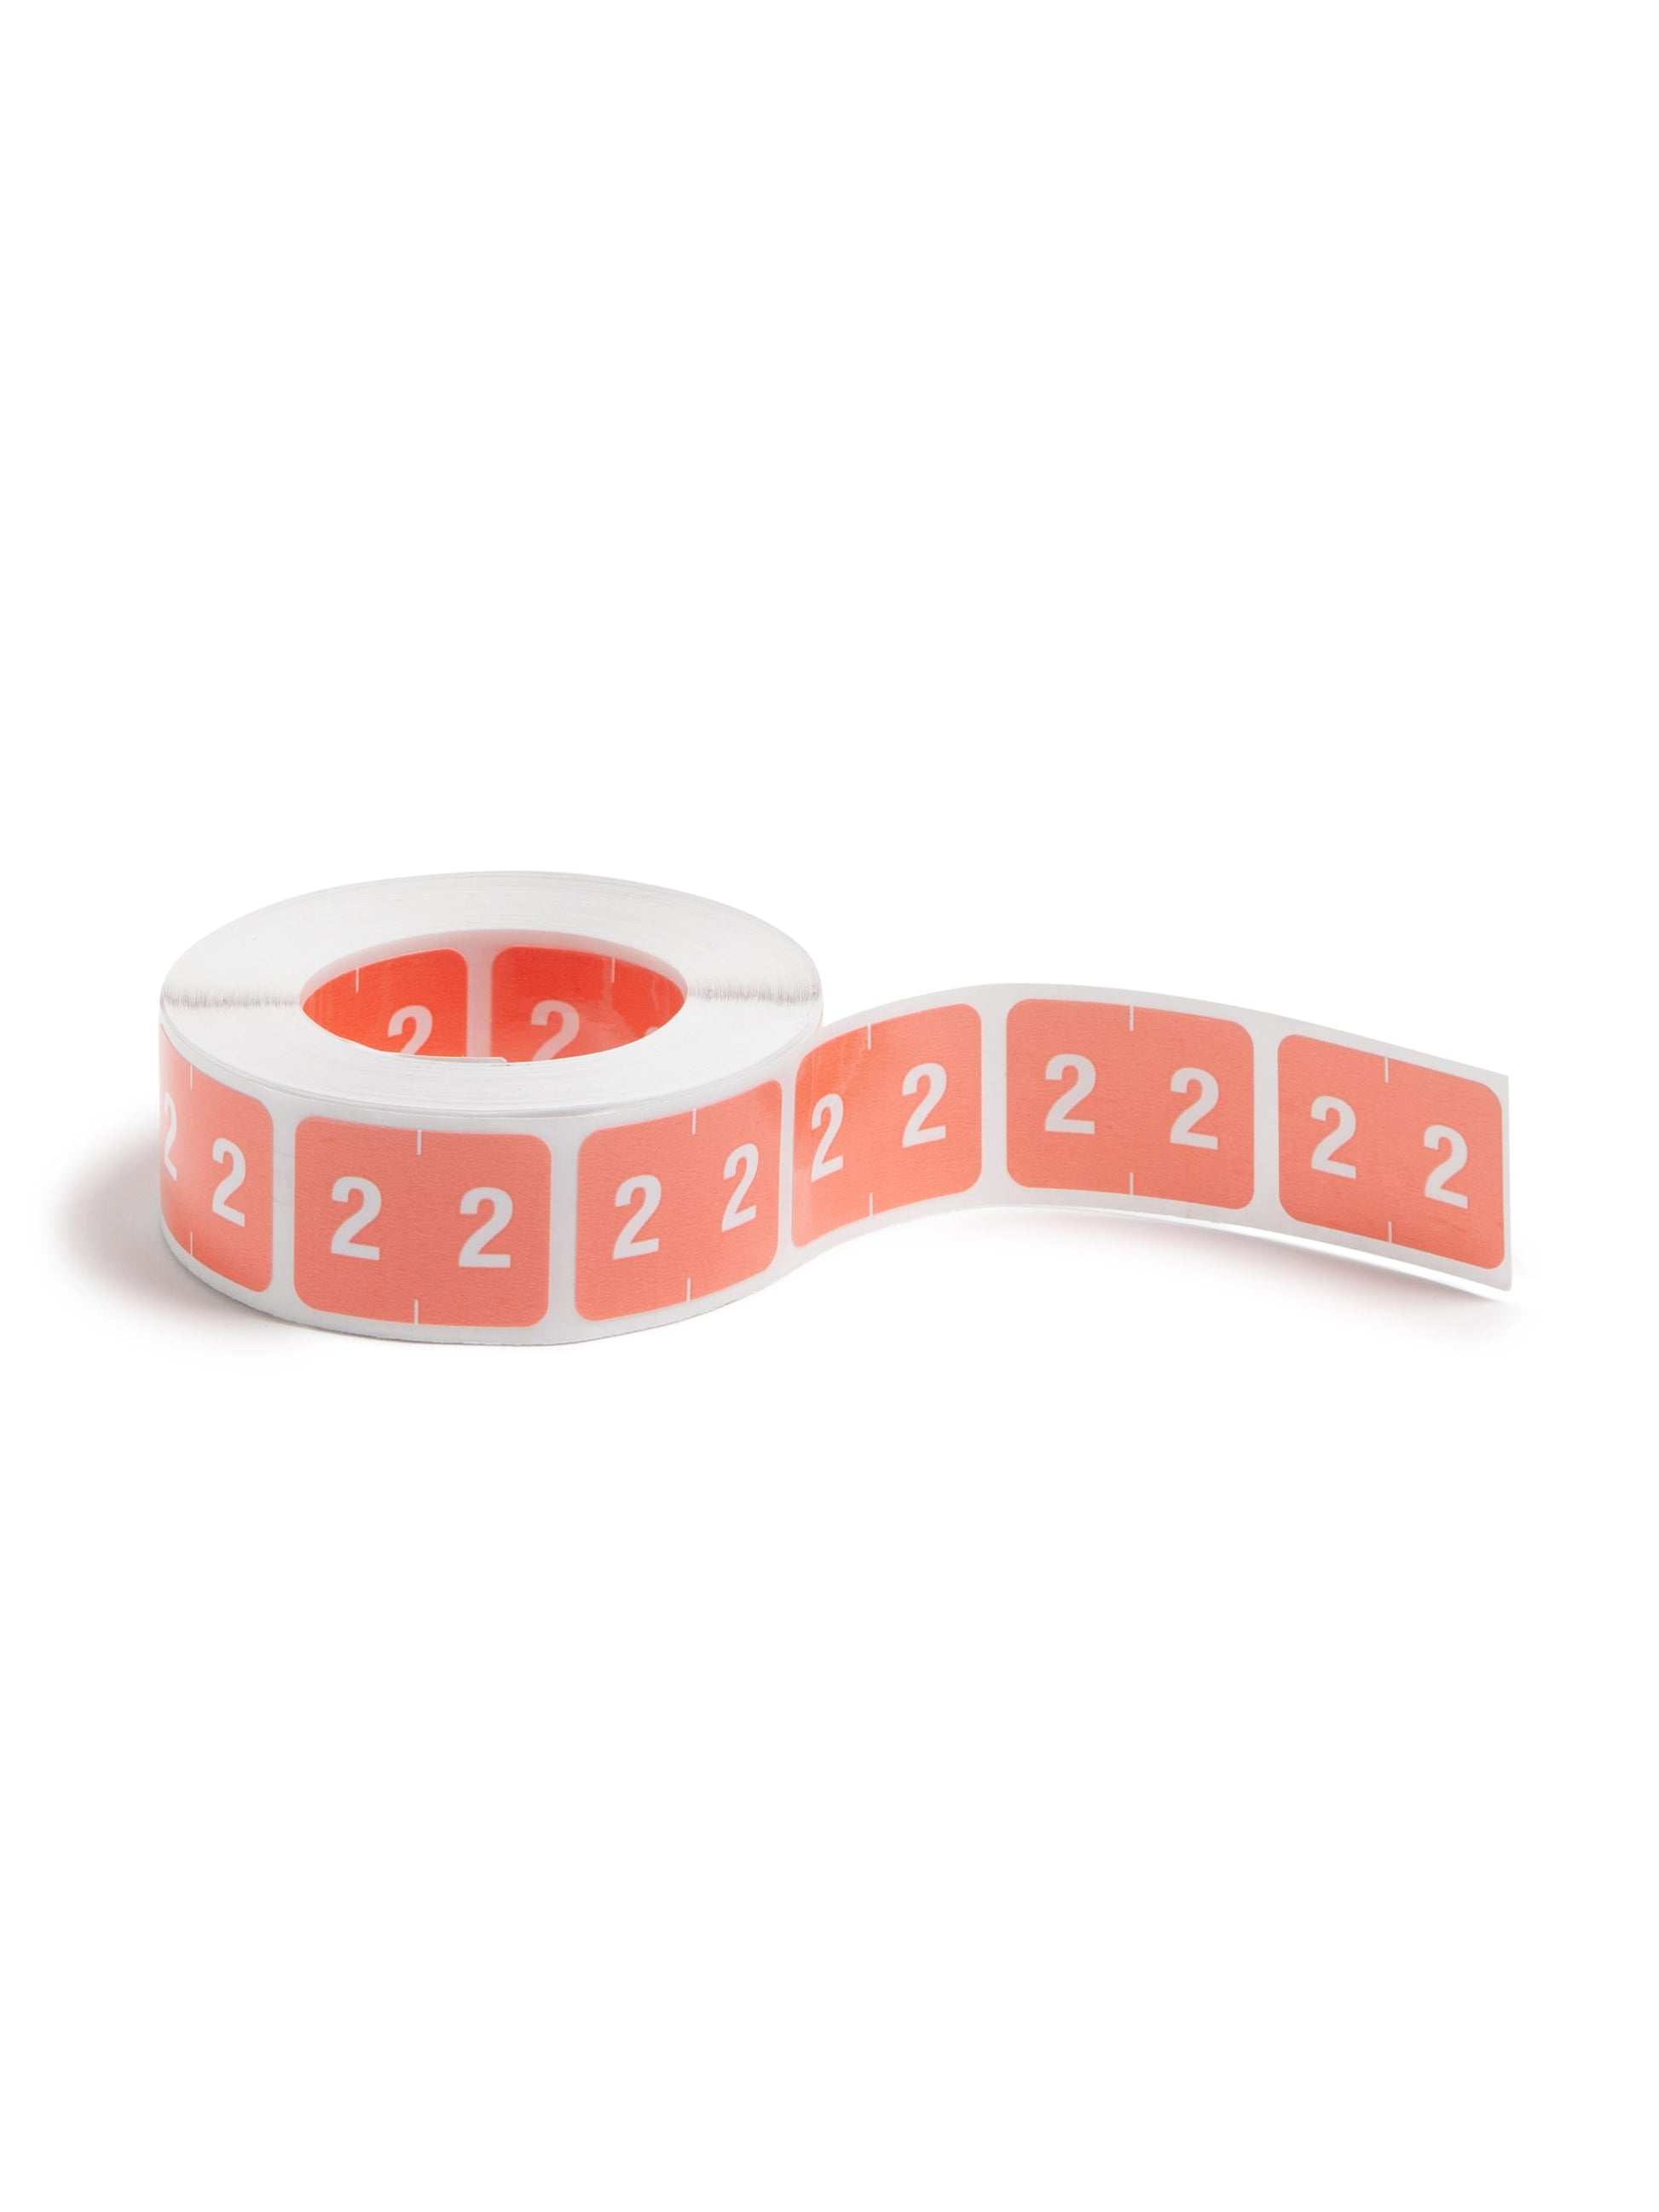 DCCRN Color-Coded Numeric Labels - Rolls, Pink Color, 1-1/4" X 1" Size, Set of 1, 086486673426